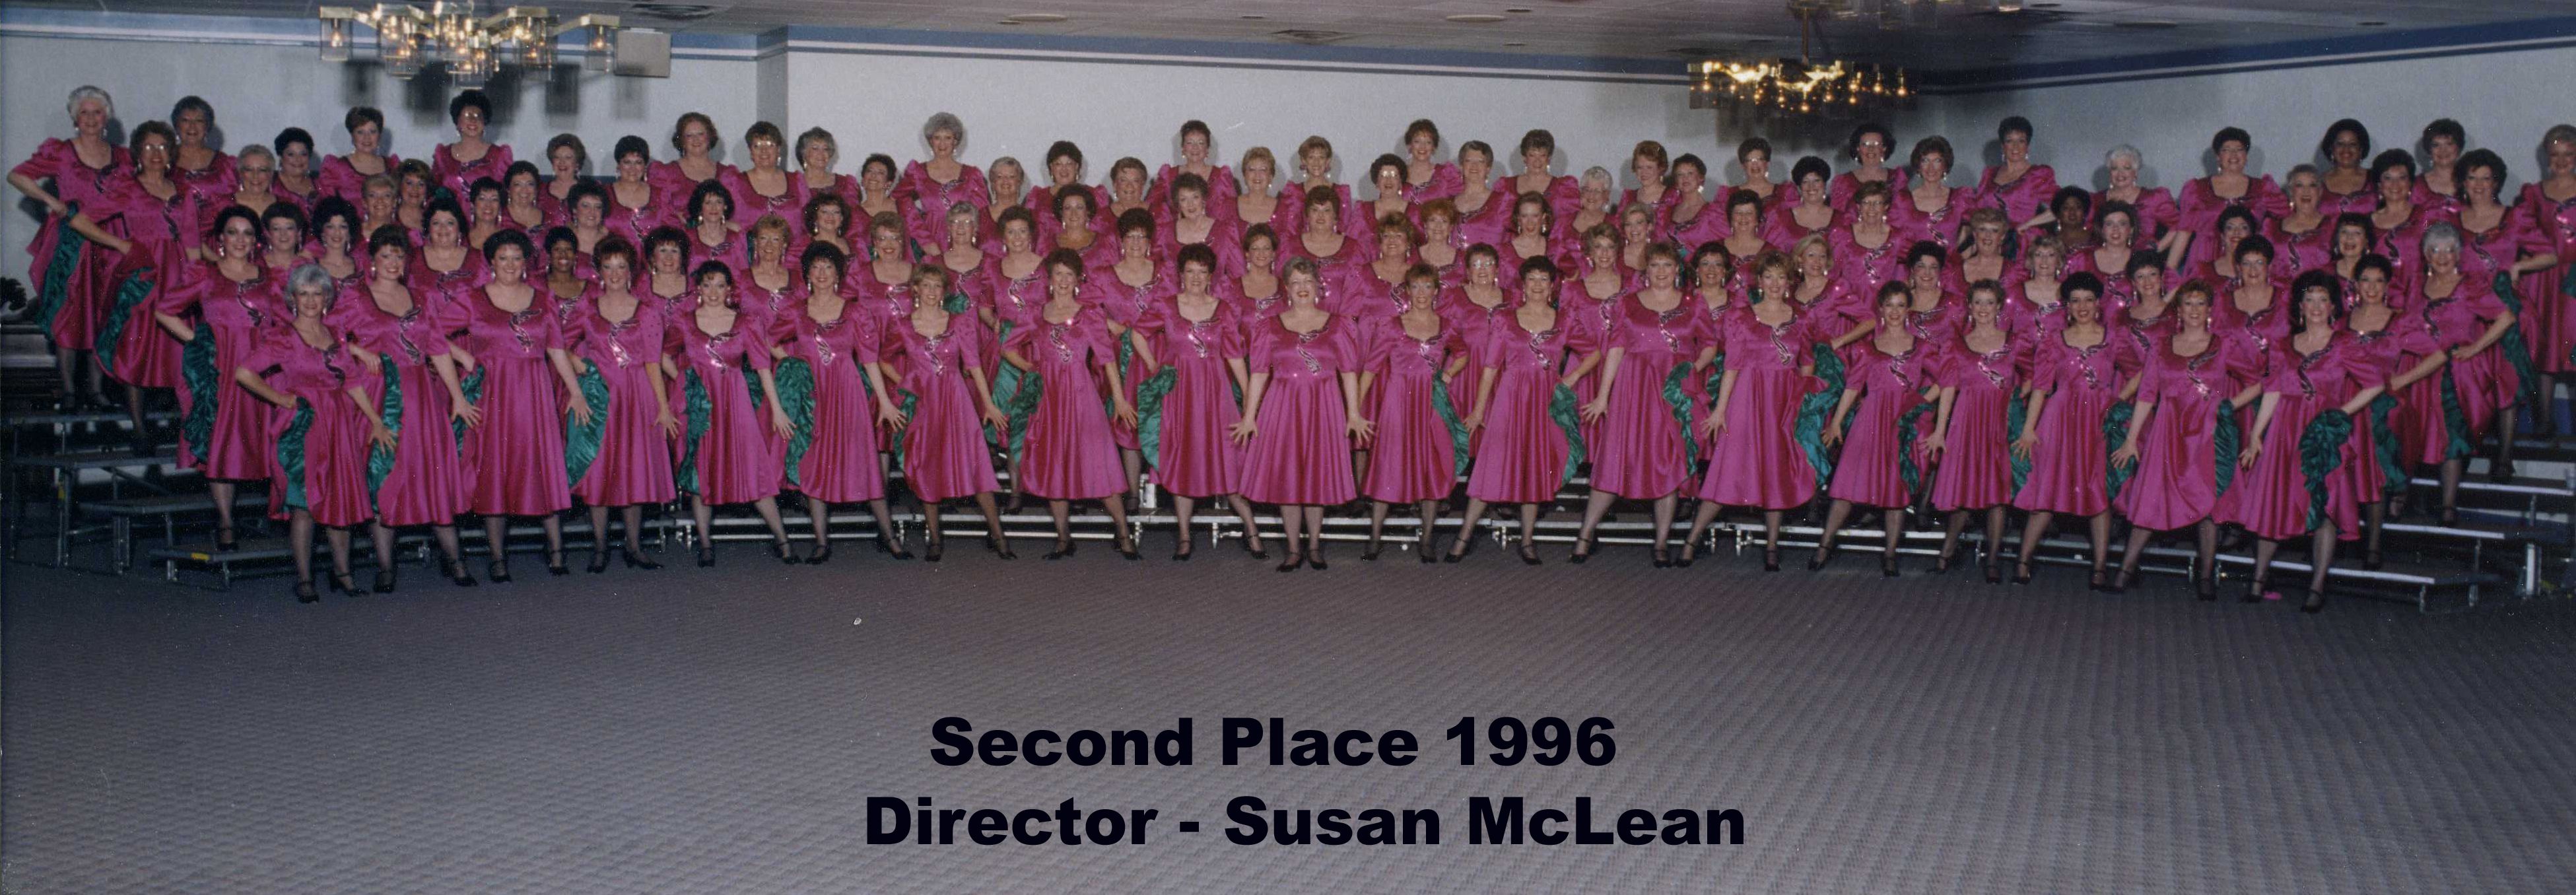 Chinook Winds Show Chorus - Second Place 1996